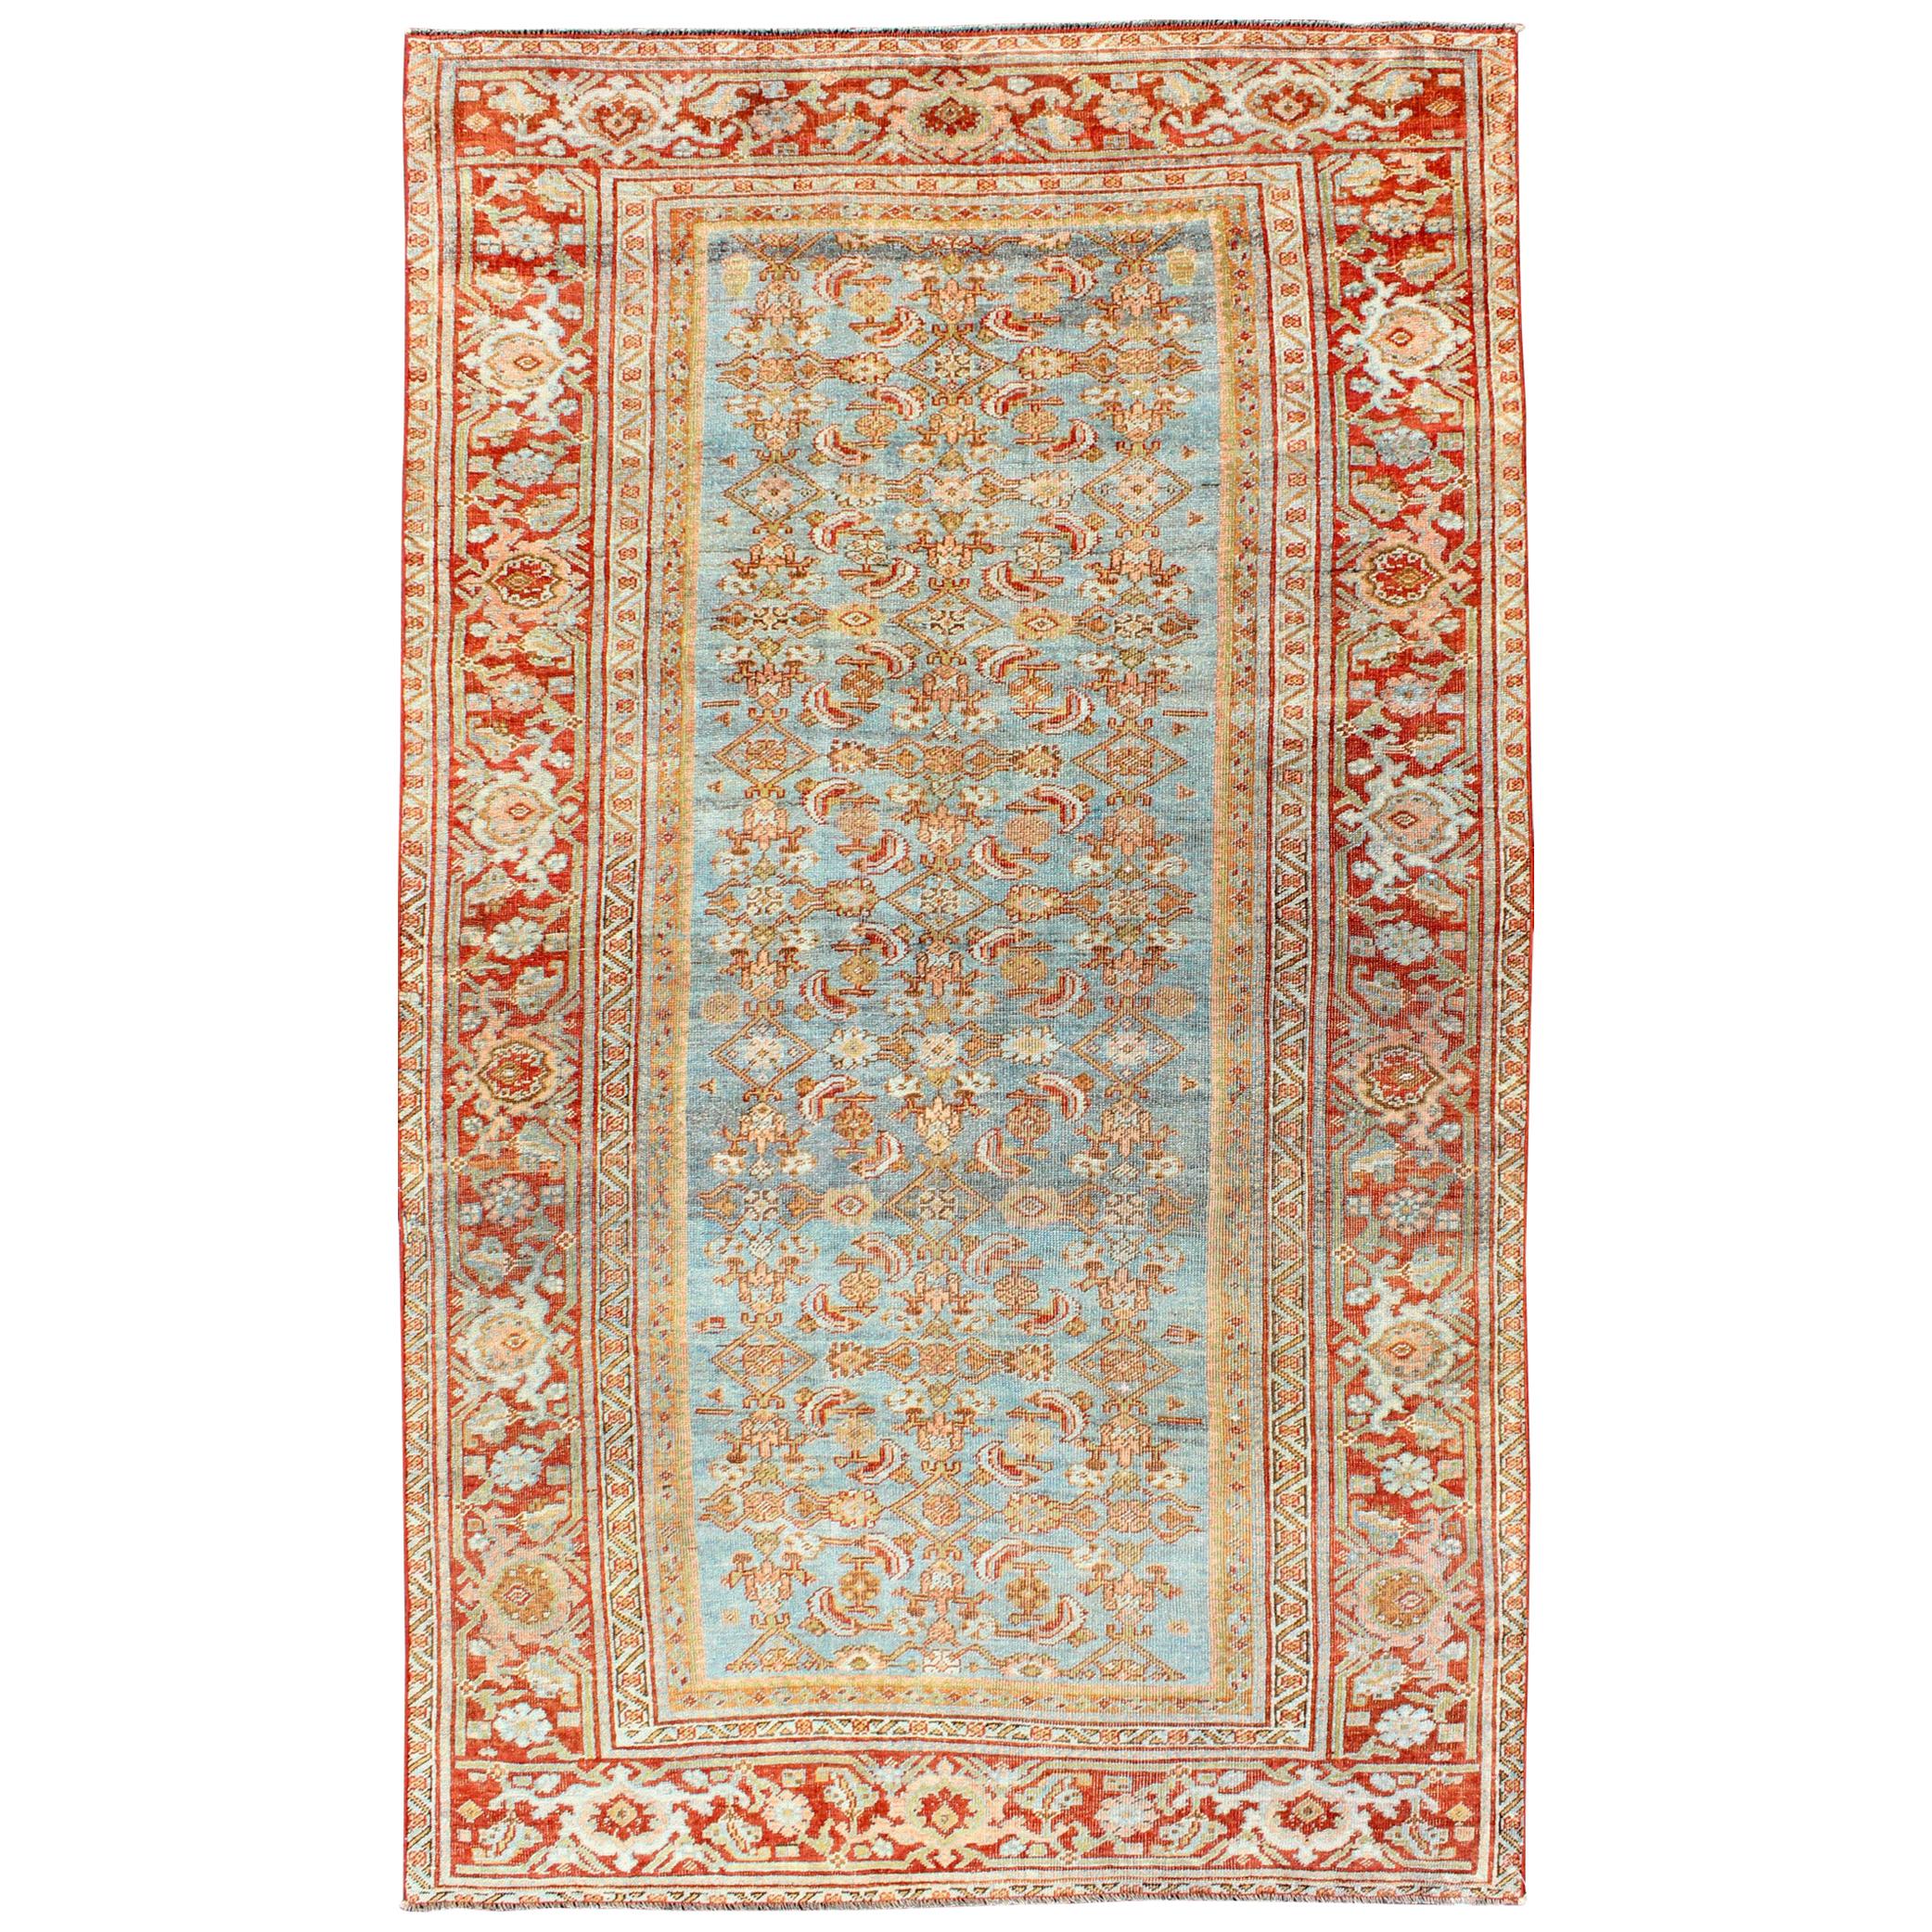 Antique Persian Bidjar Rug with Blossoming Floral Design in Light Blue and Red